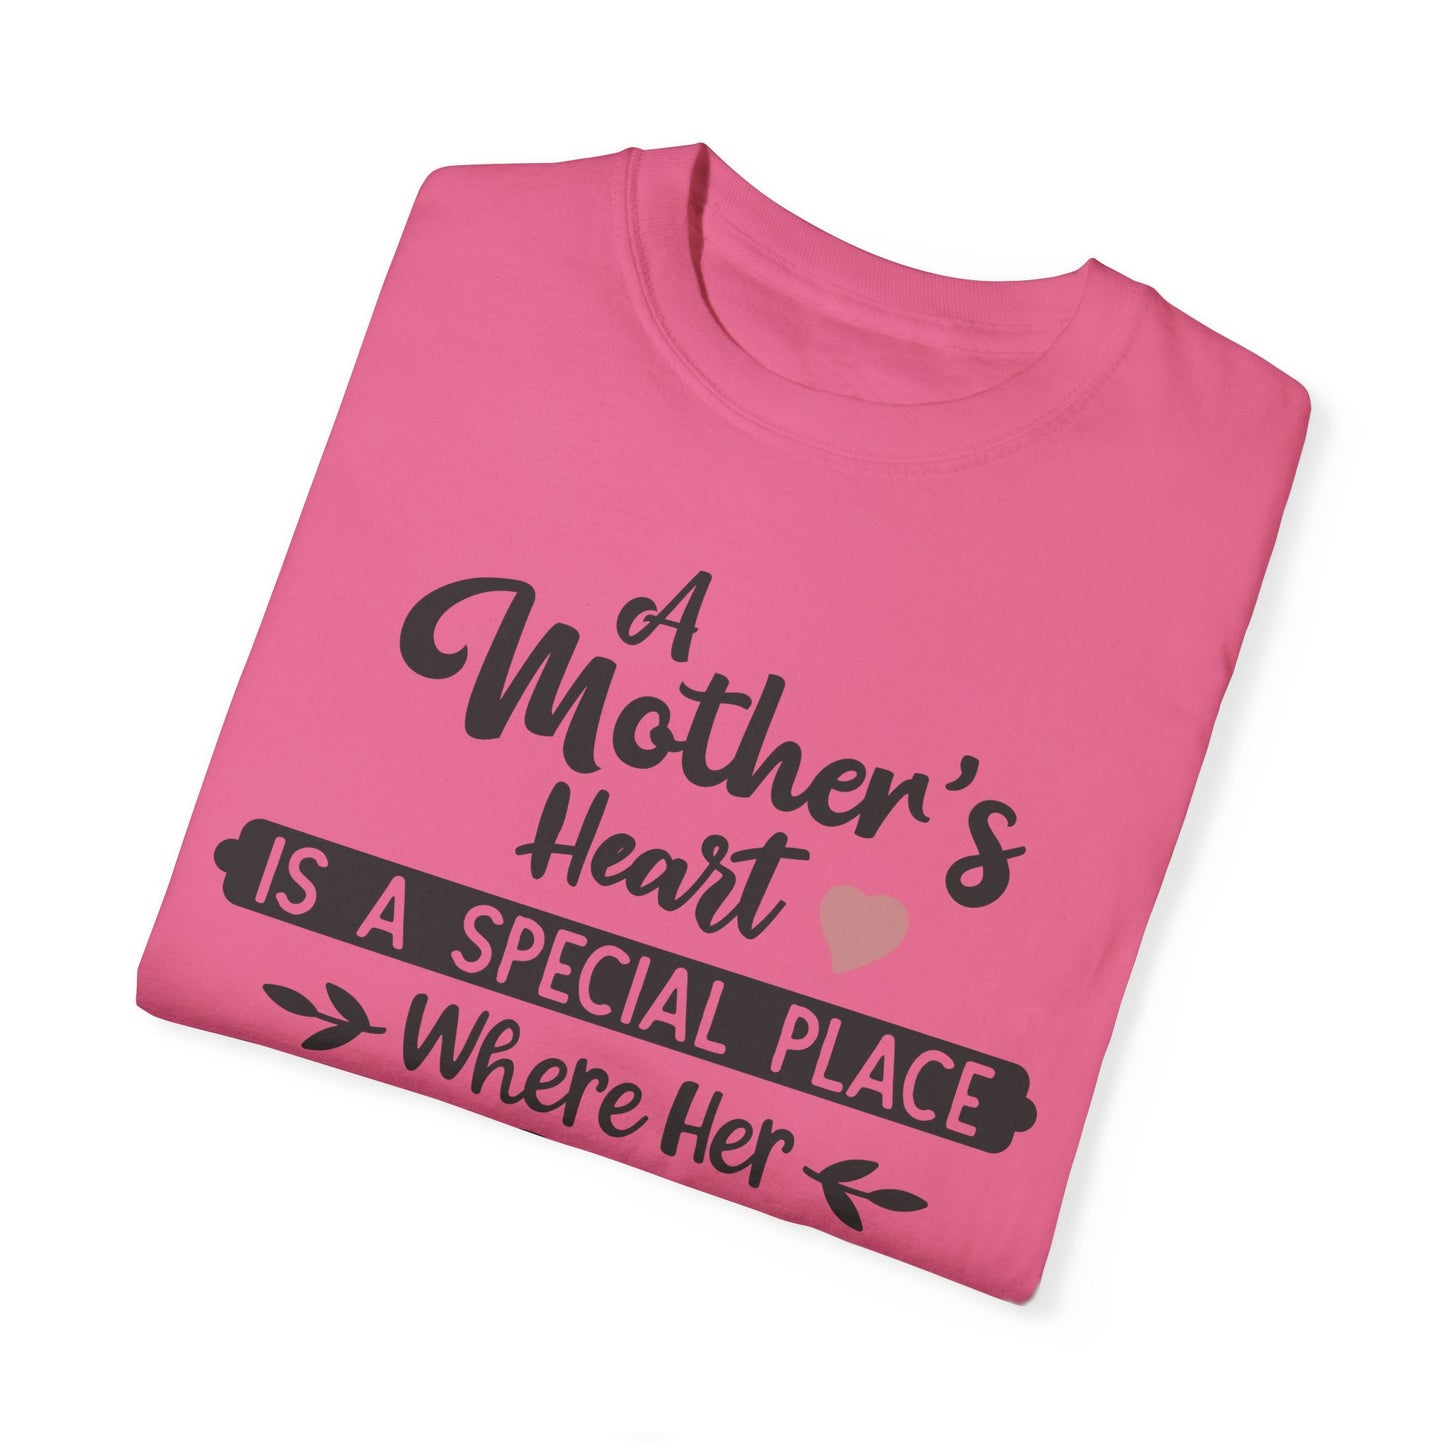 Mother's heart is a special place - Unisex Garment-Dyed T-shirt